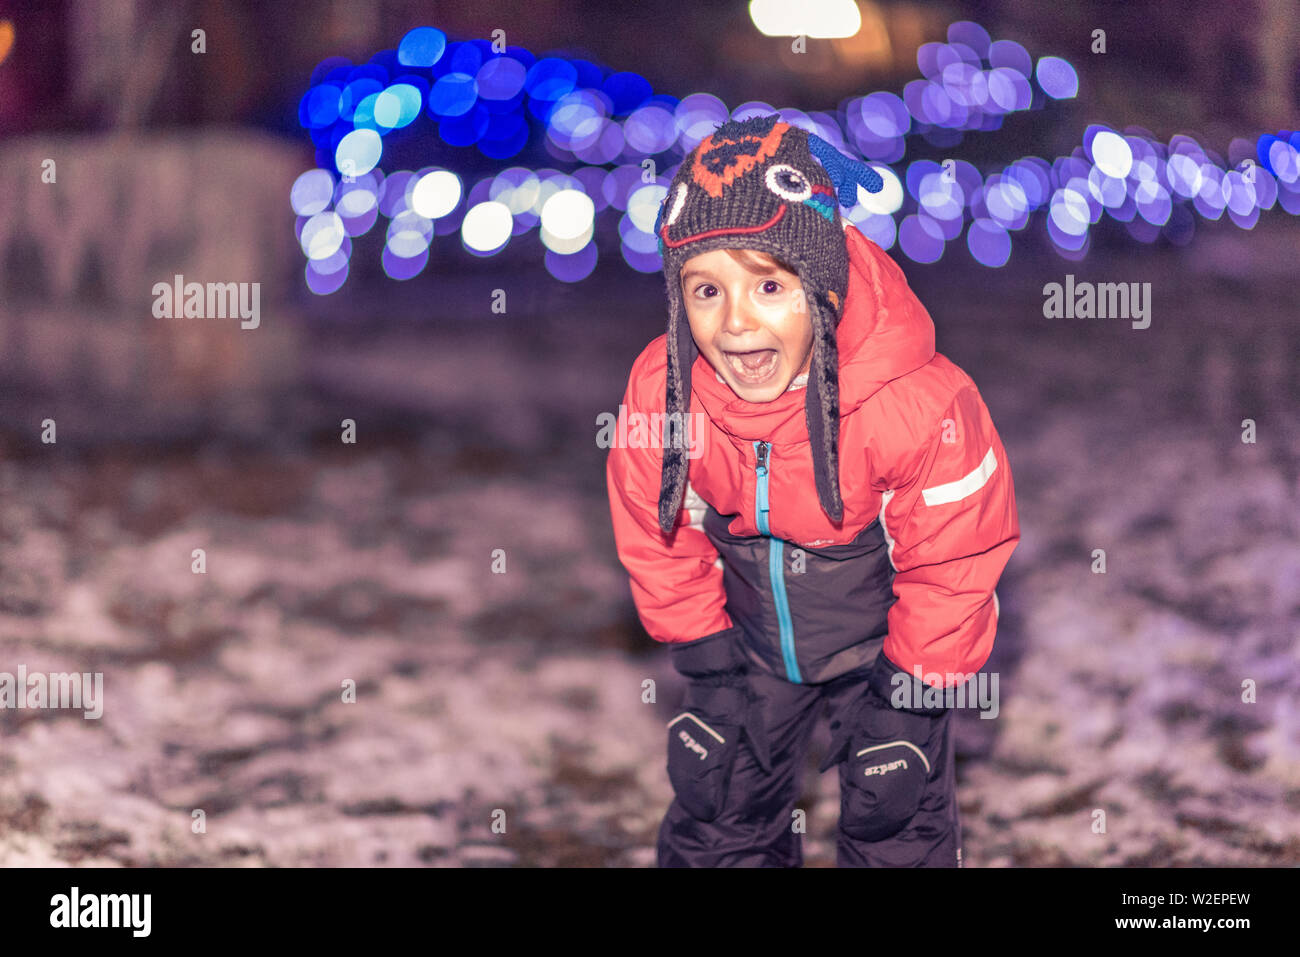 In the mood for fun, for playing with snowballs, for spending time outdoors, playing. He is the little boy with blinking eyes when it comes to play an Stock Photo